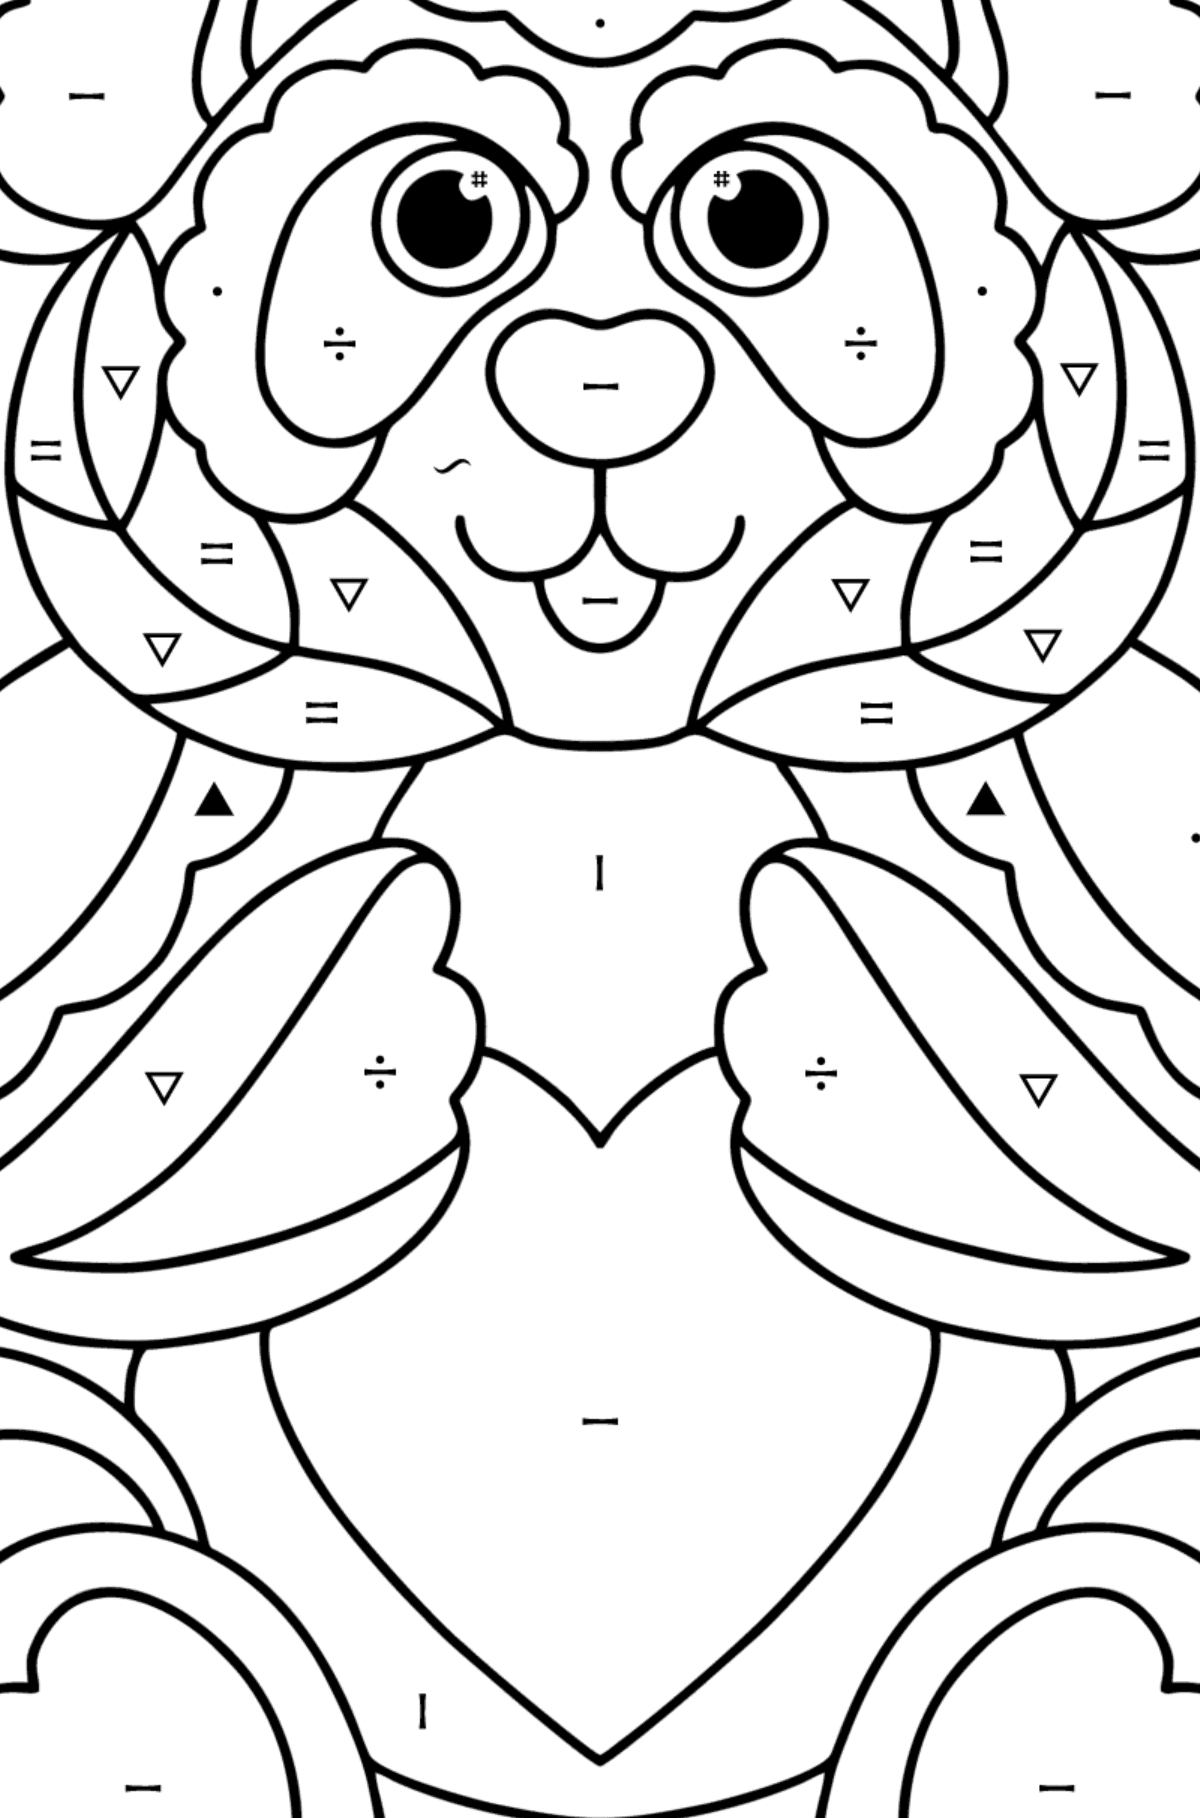 Panda antistress coloring page - Coloring by Symbols for Kids